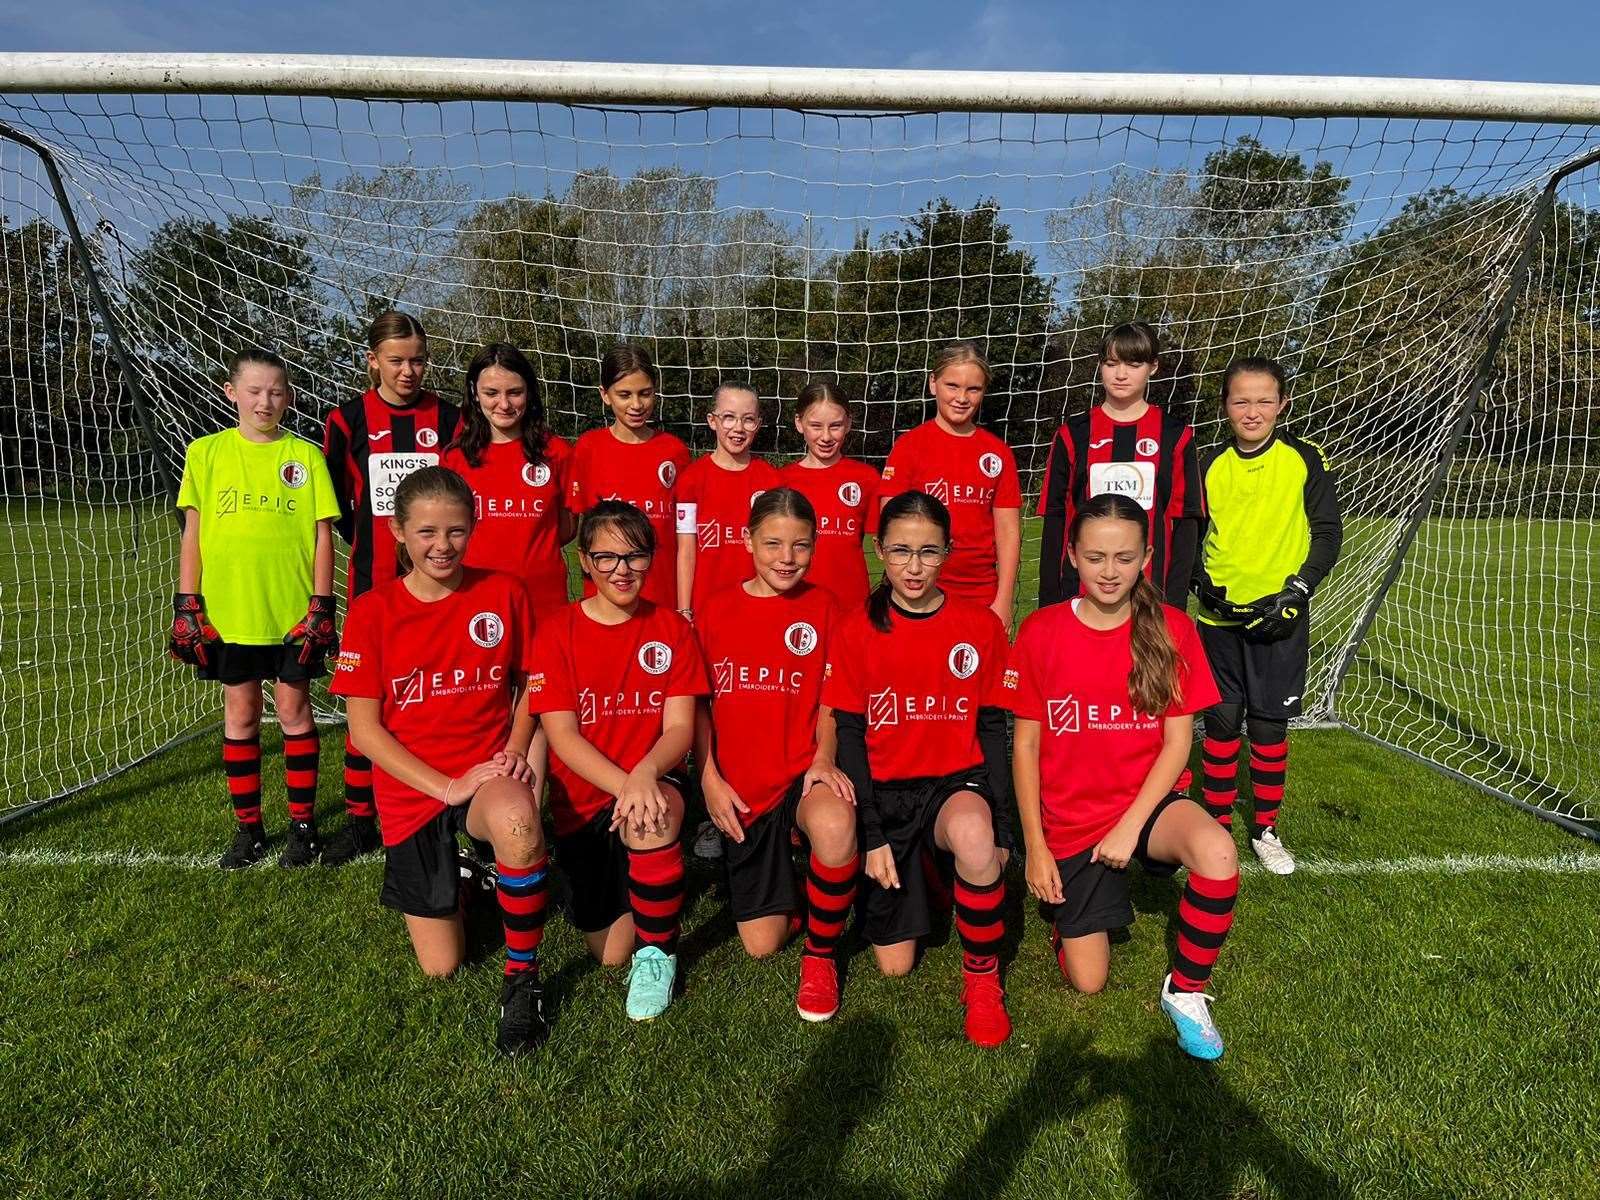 KLSC Lionesses U12, who scored their first goals at the weekend.